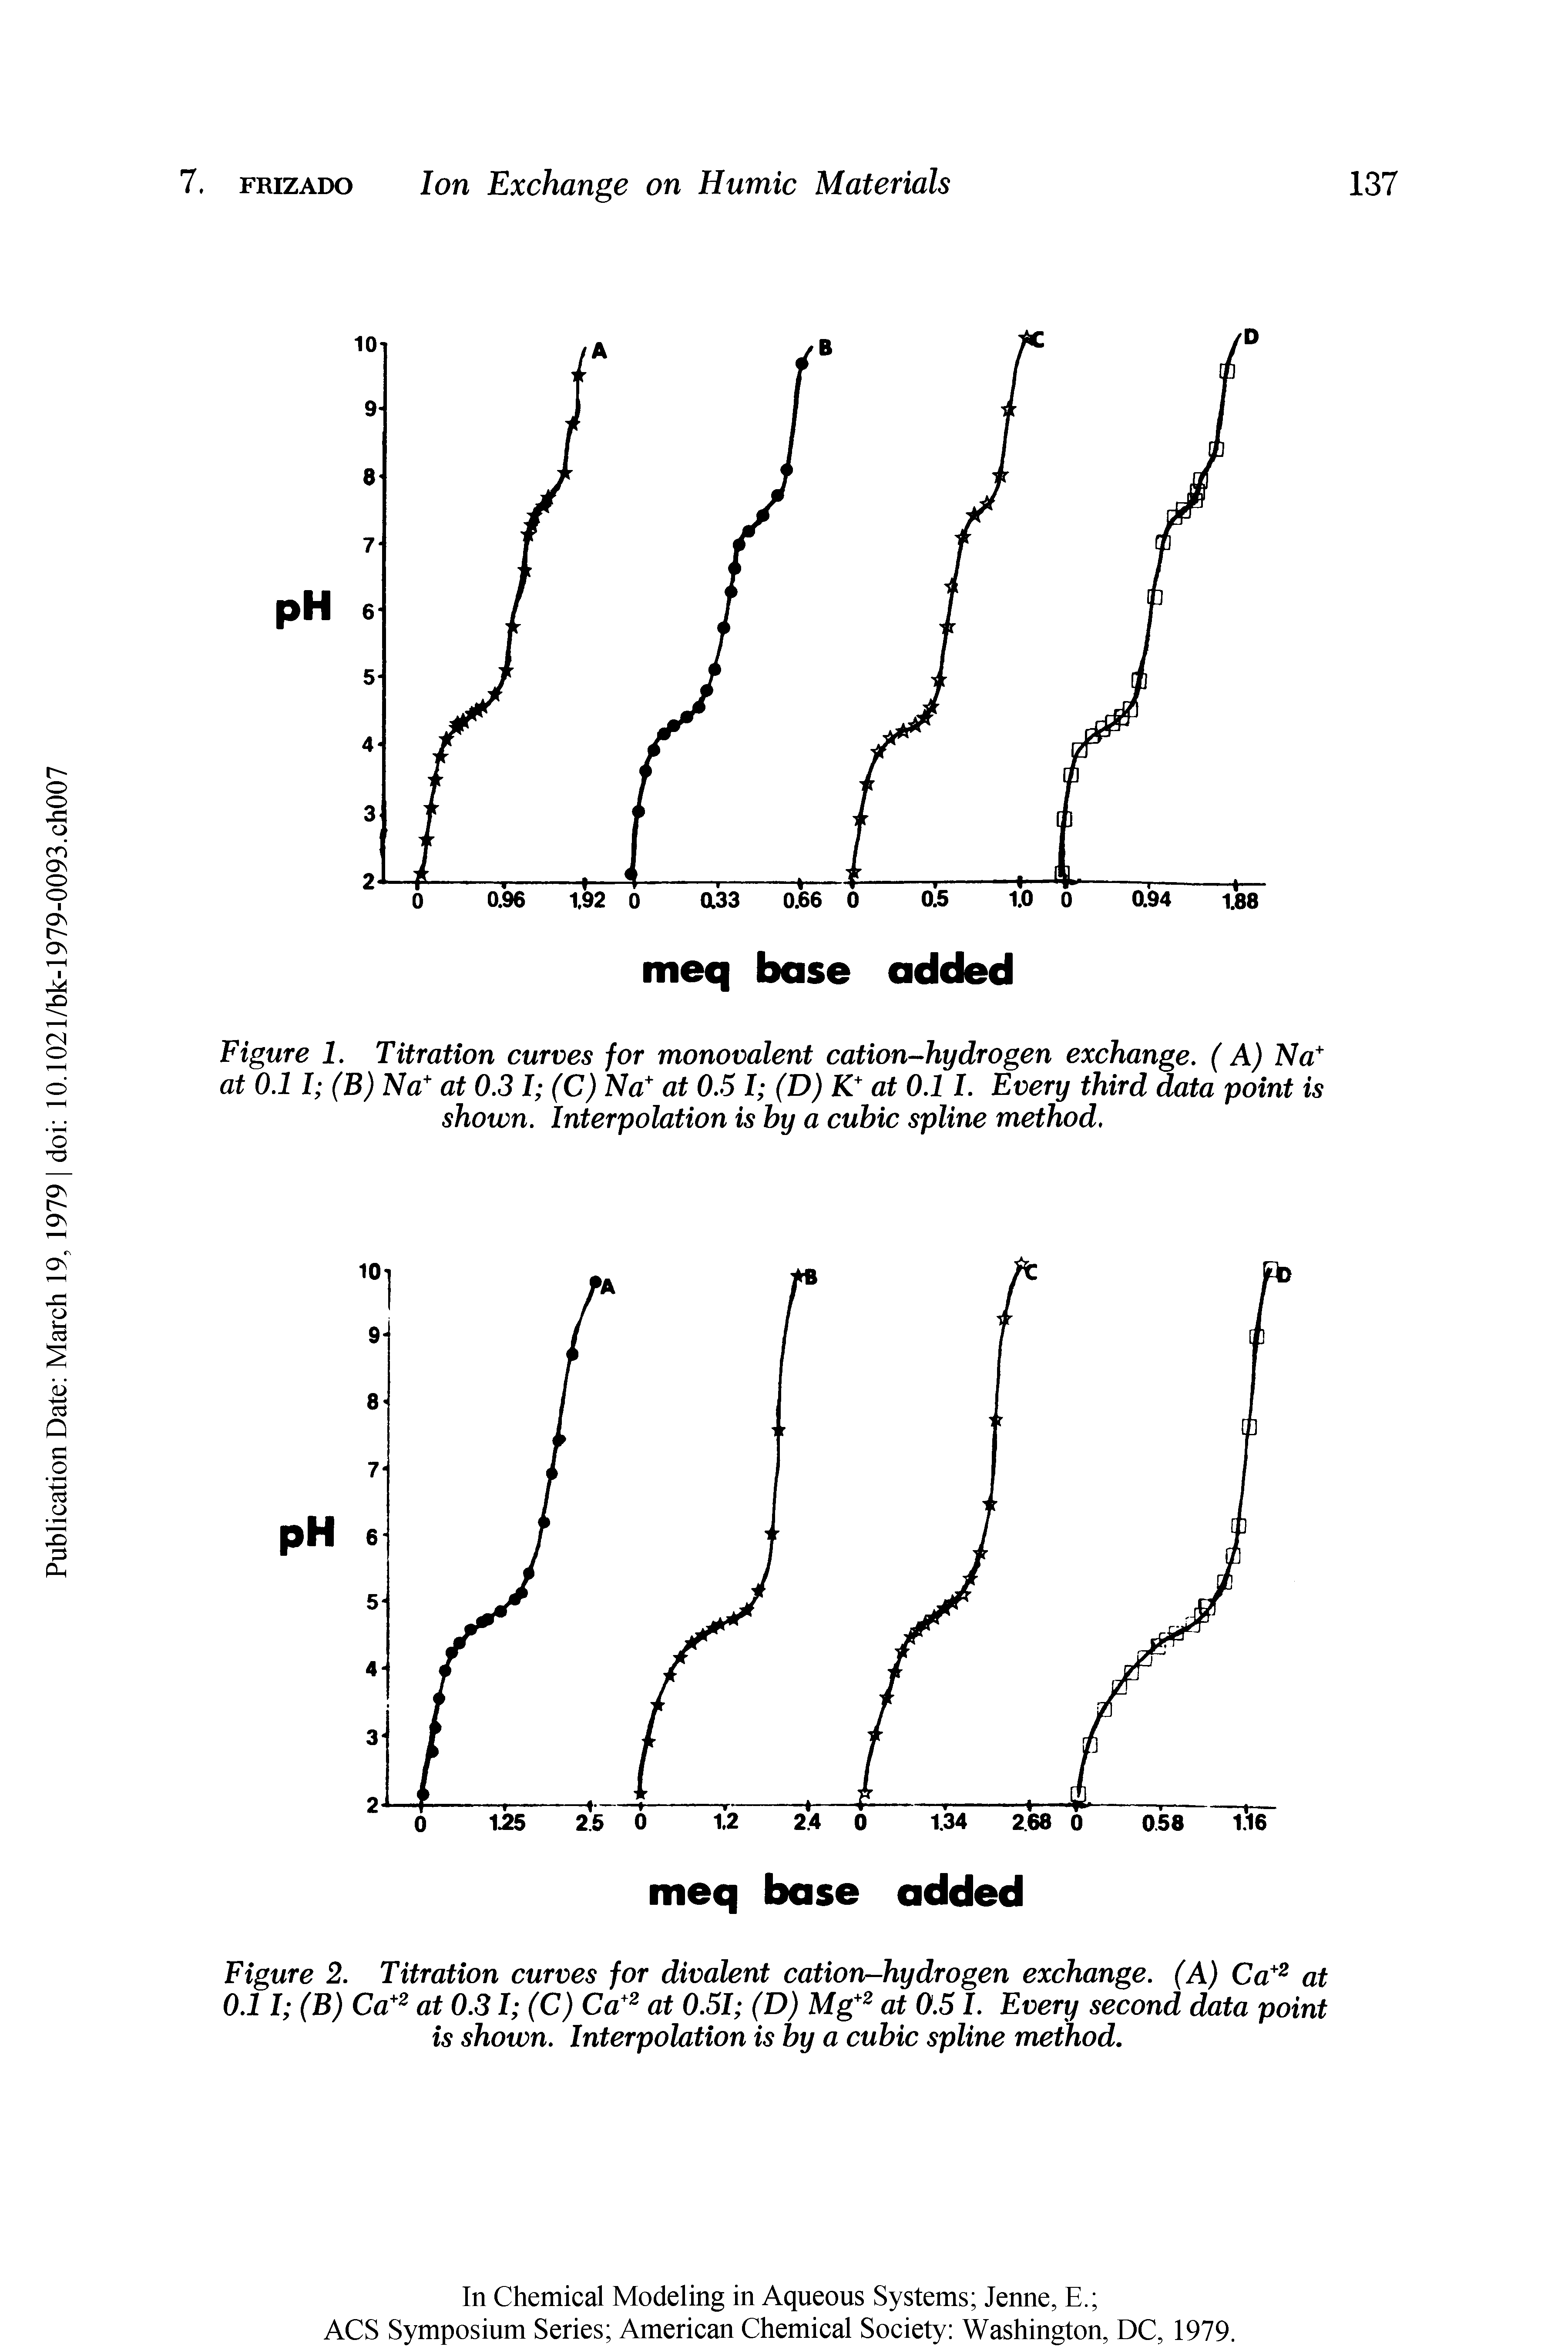 Figure 1. Titration curves for monovalent cation-hydrogen exchange. (A) Na at 0.11 (B) Na at 0.3 I (C)Na at 0.5 I (D) K" at 0.11. Every third data point is shown. Interpolation is by a cubic spline method.